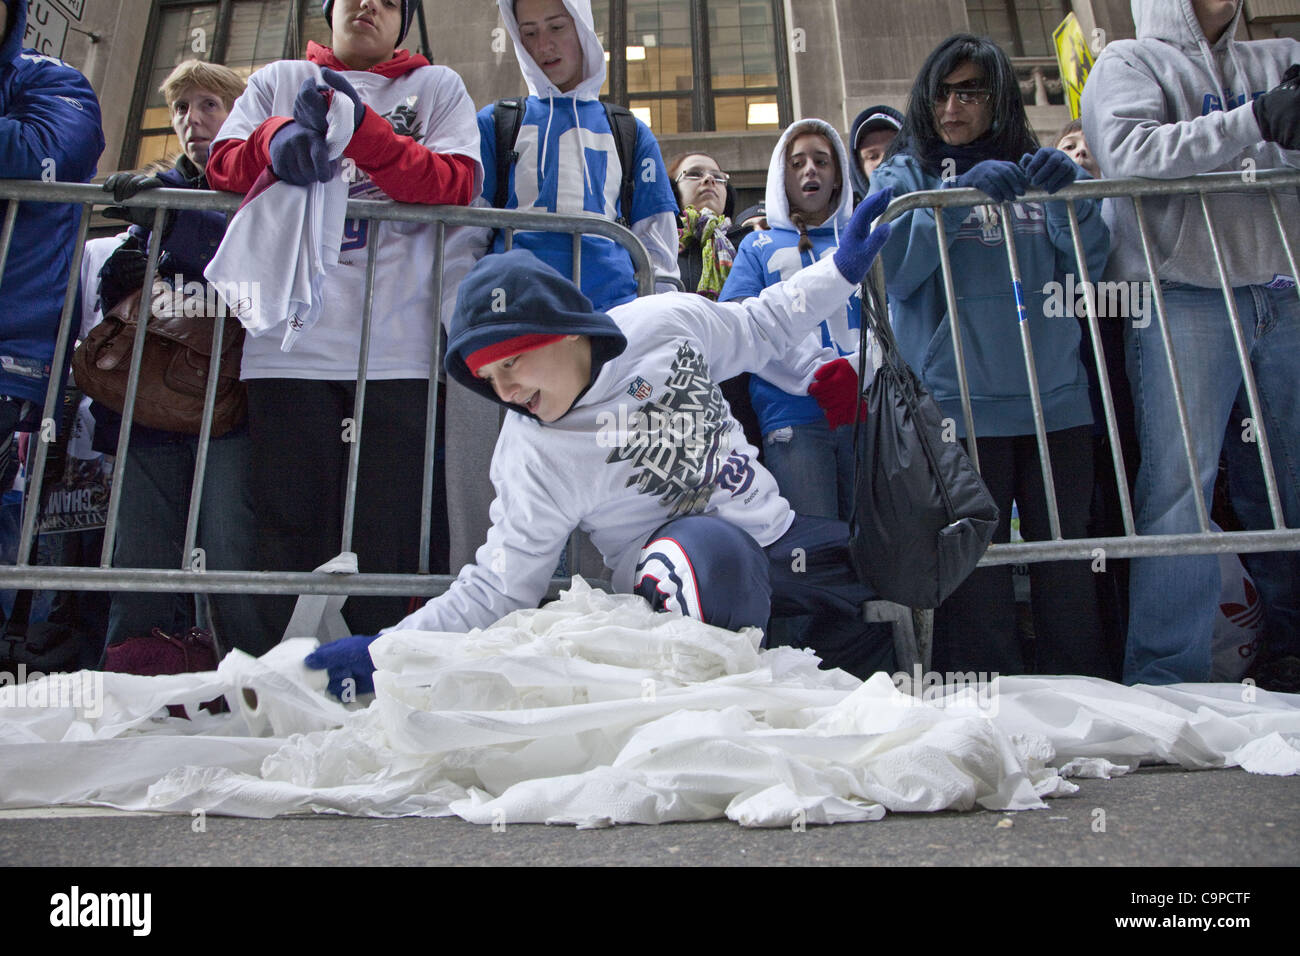 Feb. 7, 2012 - New York, New York, U.S - During the Superbowl Champion Parade a fan collects paper to use in cheering his winning team the New York Giants in Lower Manhattan. (Credit Image: © Gary Dwight Miller/ZUMAPRESS.com) Stock Photo